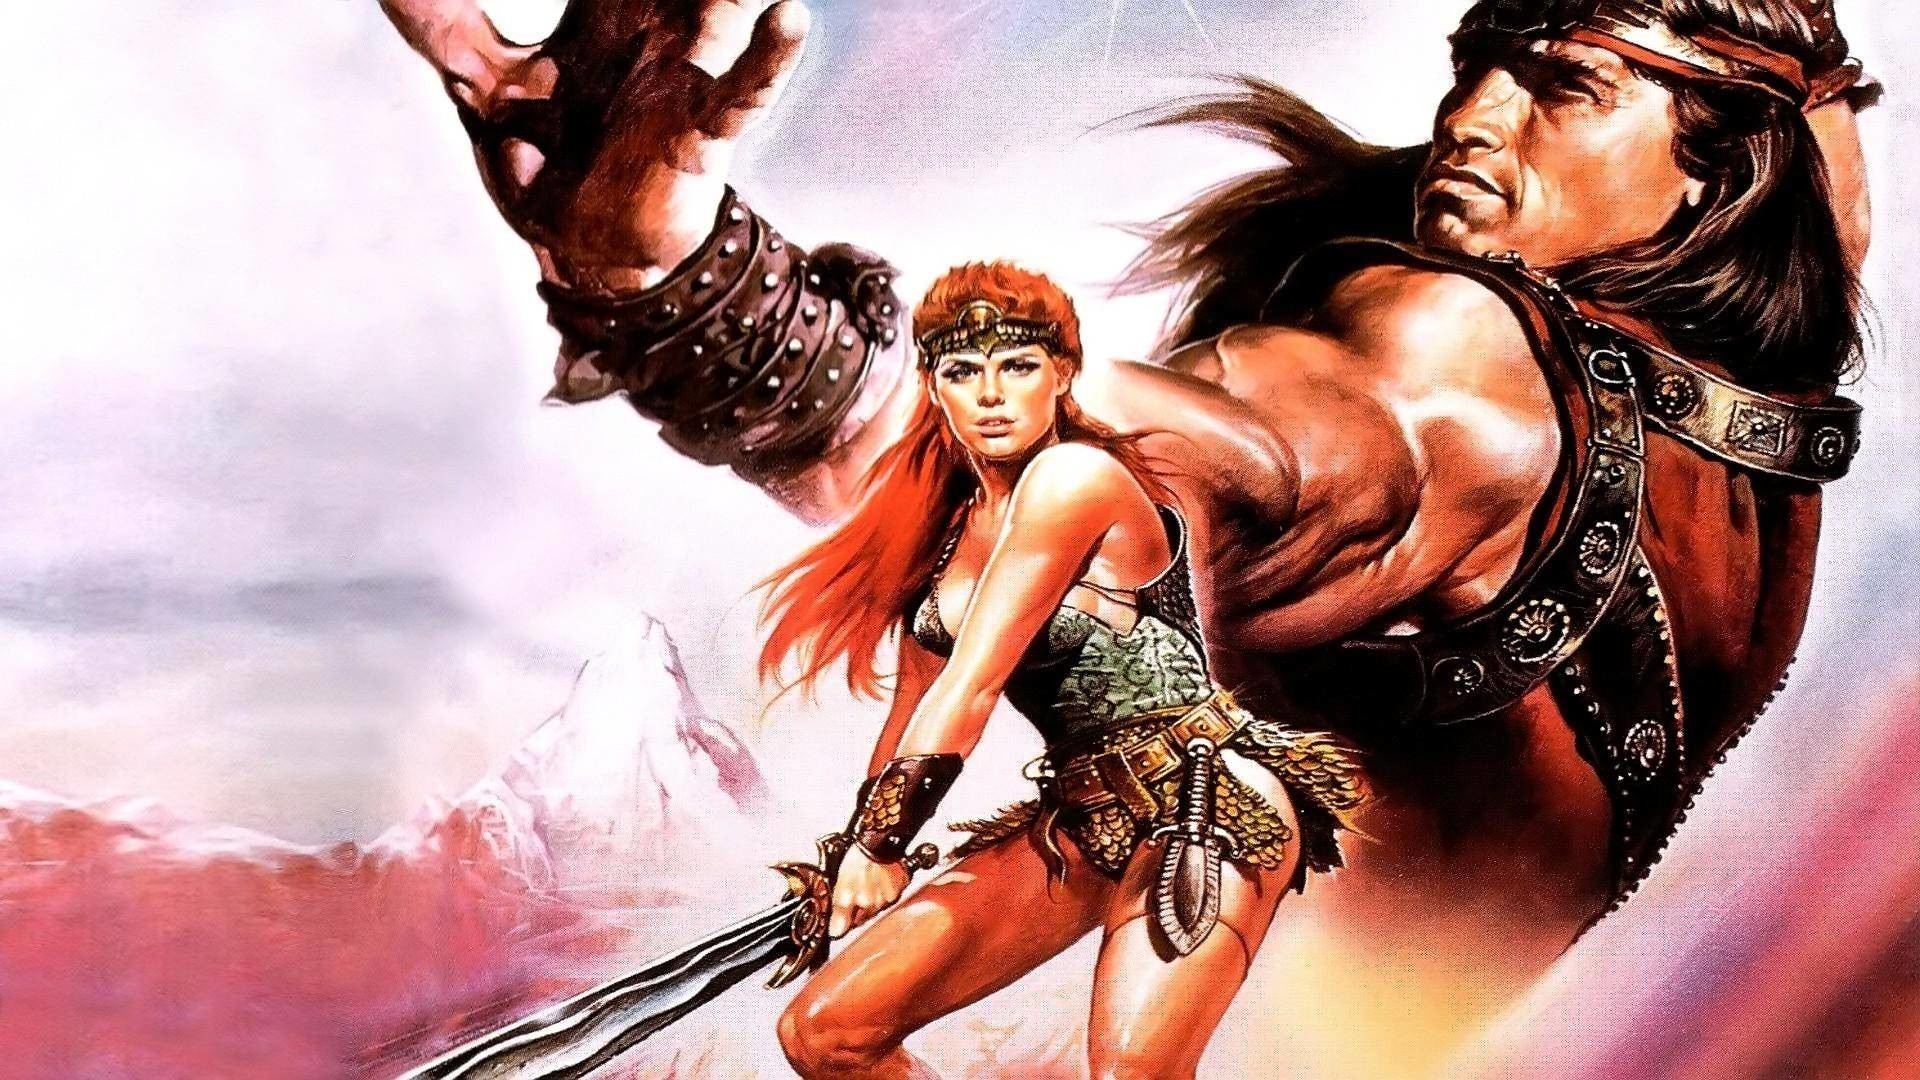 1920x1080 Red Sonja (Wallpaper), Wallpaper for "Red Sonja". "Red Sonja" is a 1985  Dutch-American sword and sorcery action film directed by Richard Fleischer.